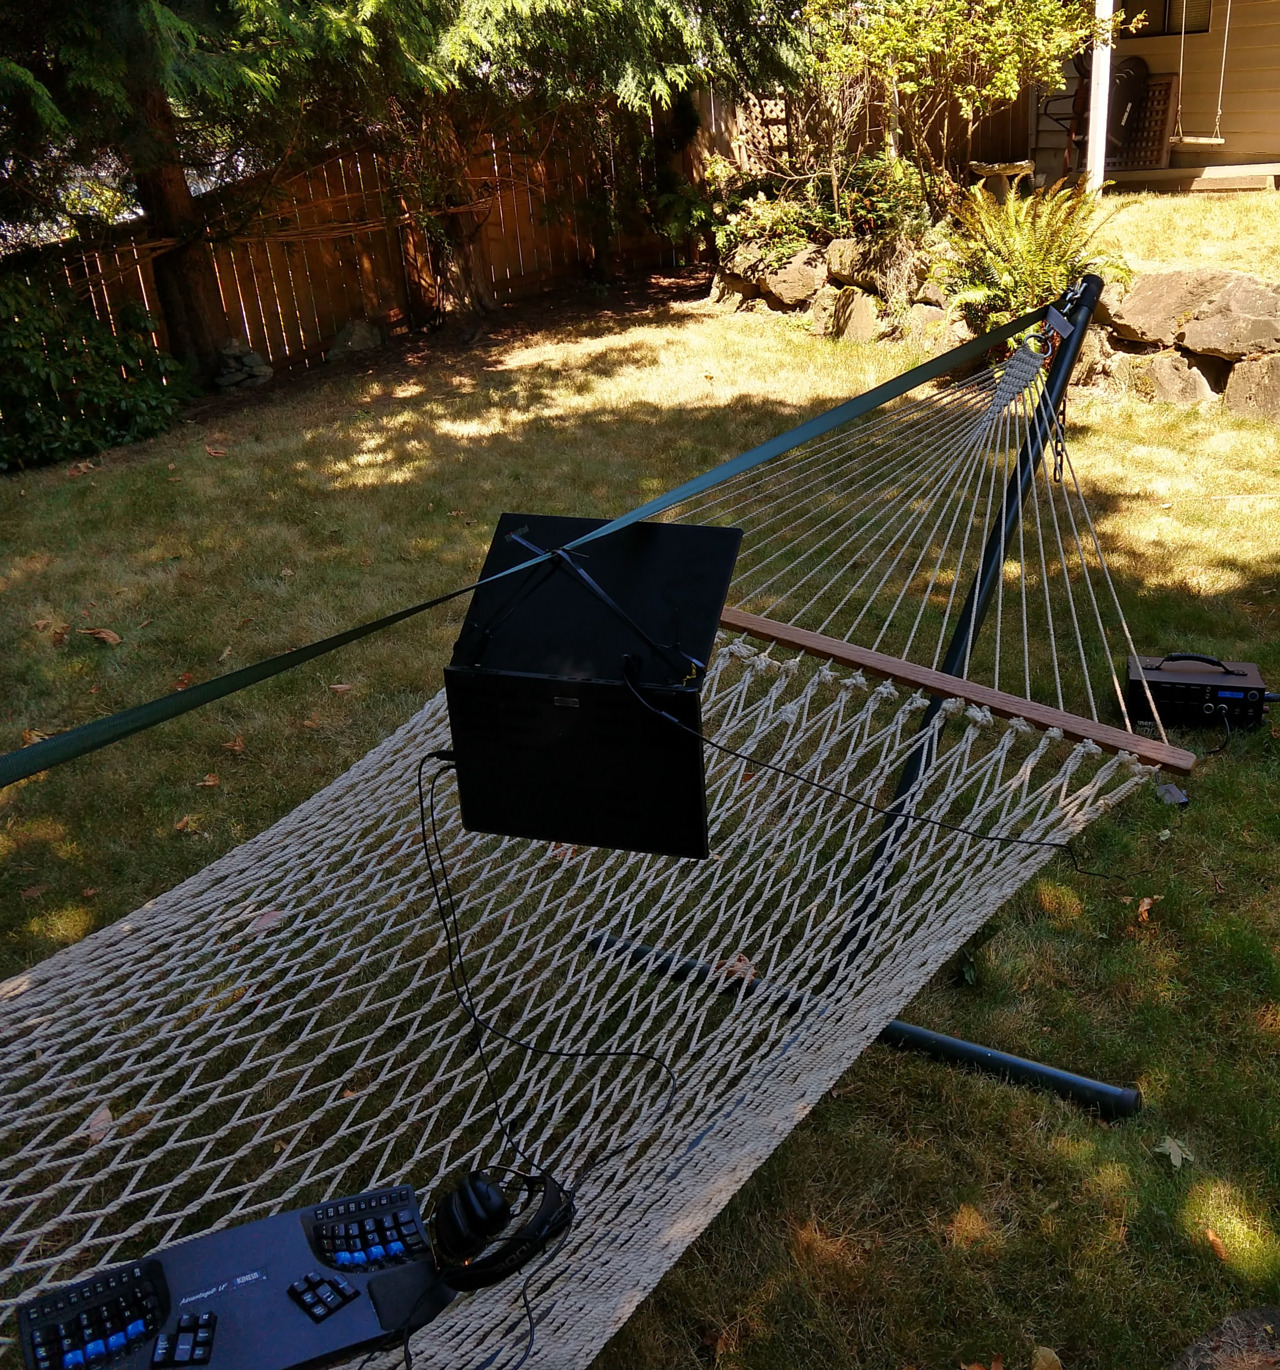 strap tensioned across hammock stand